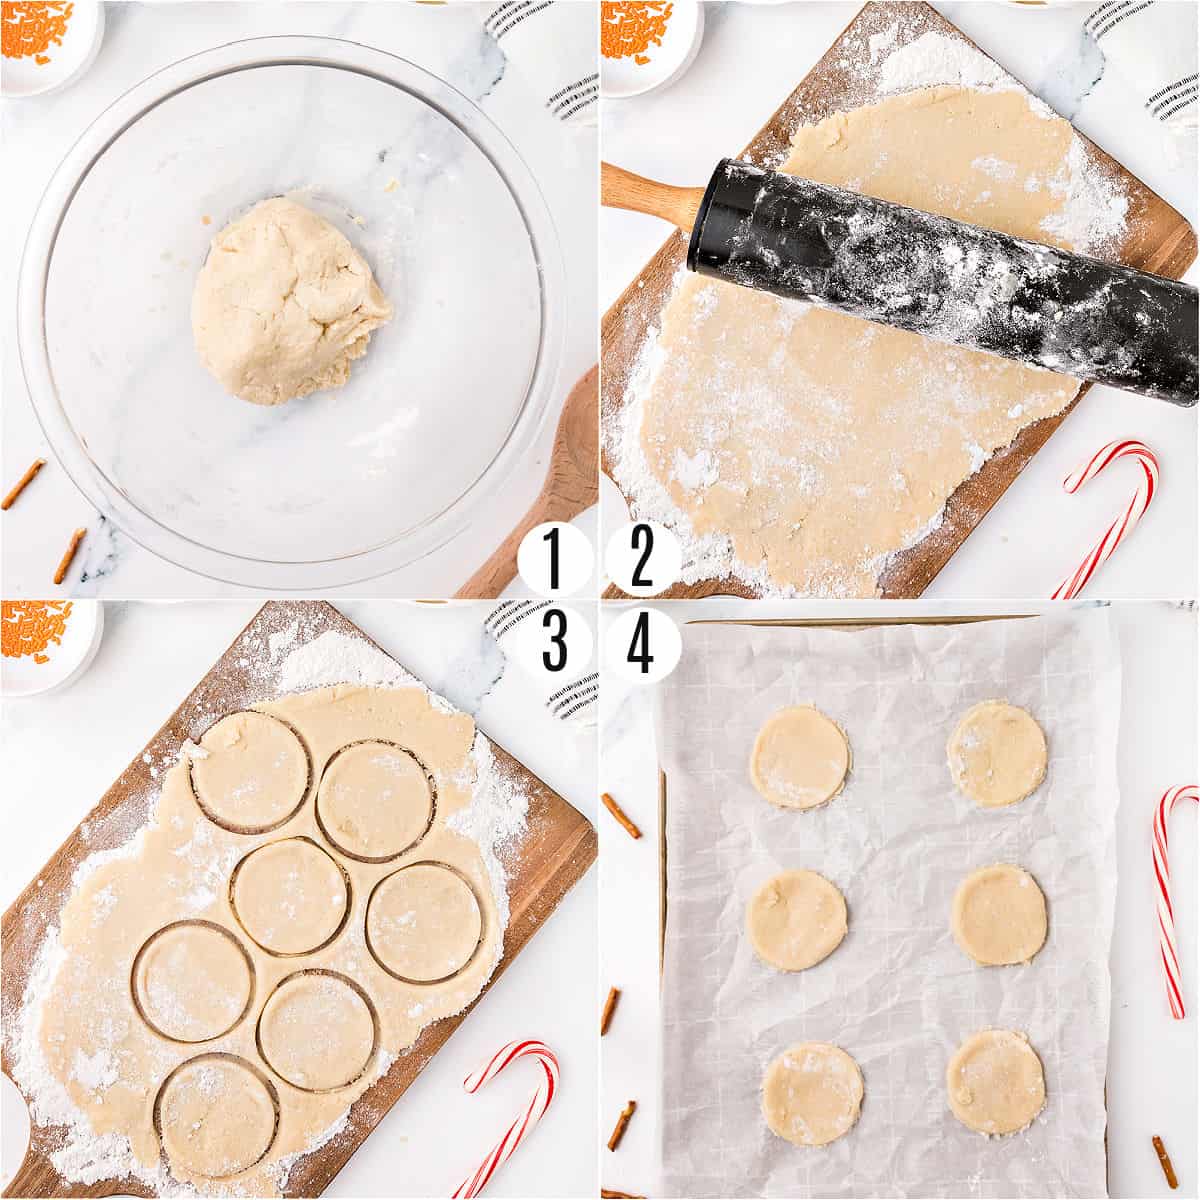 Step by step photos showing how to make sugar cookie dough. 